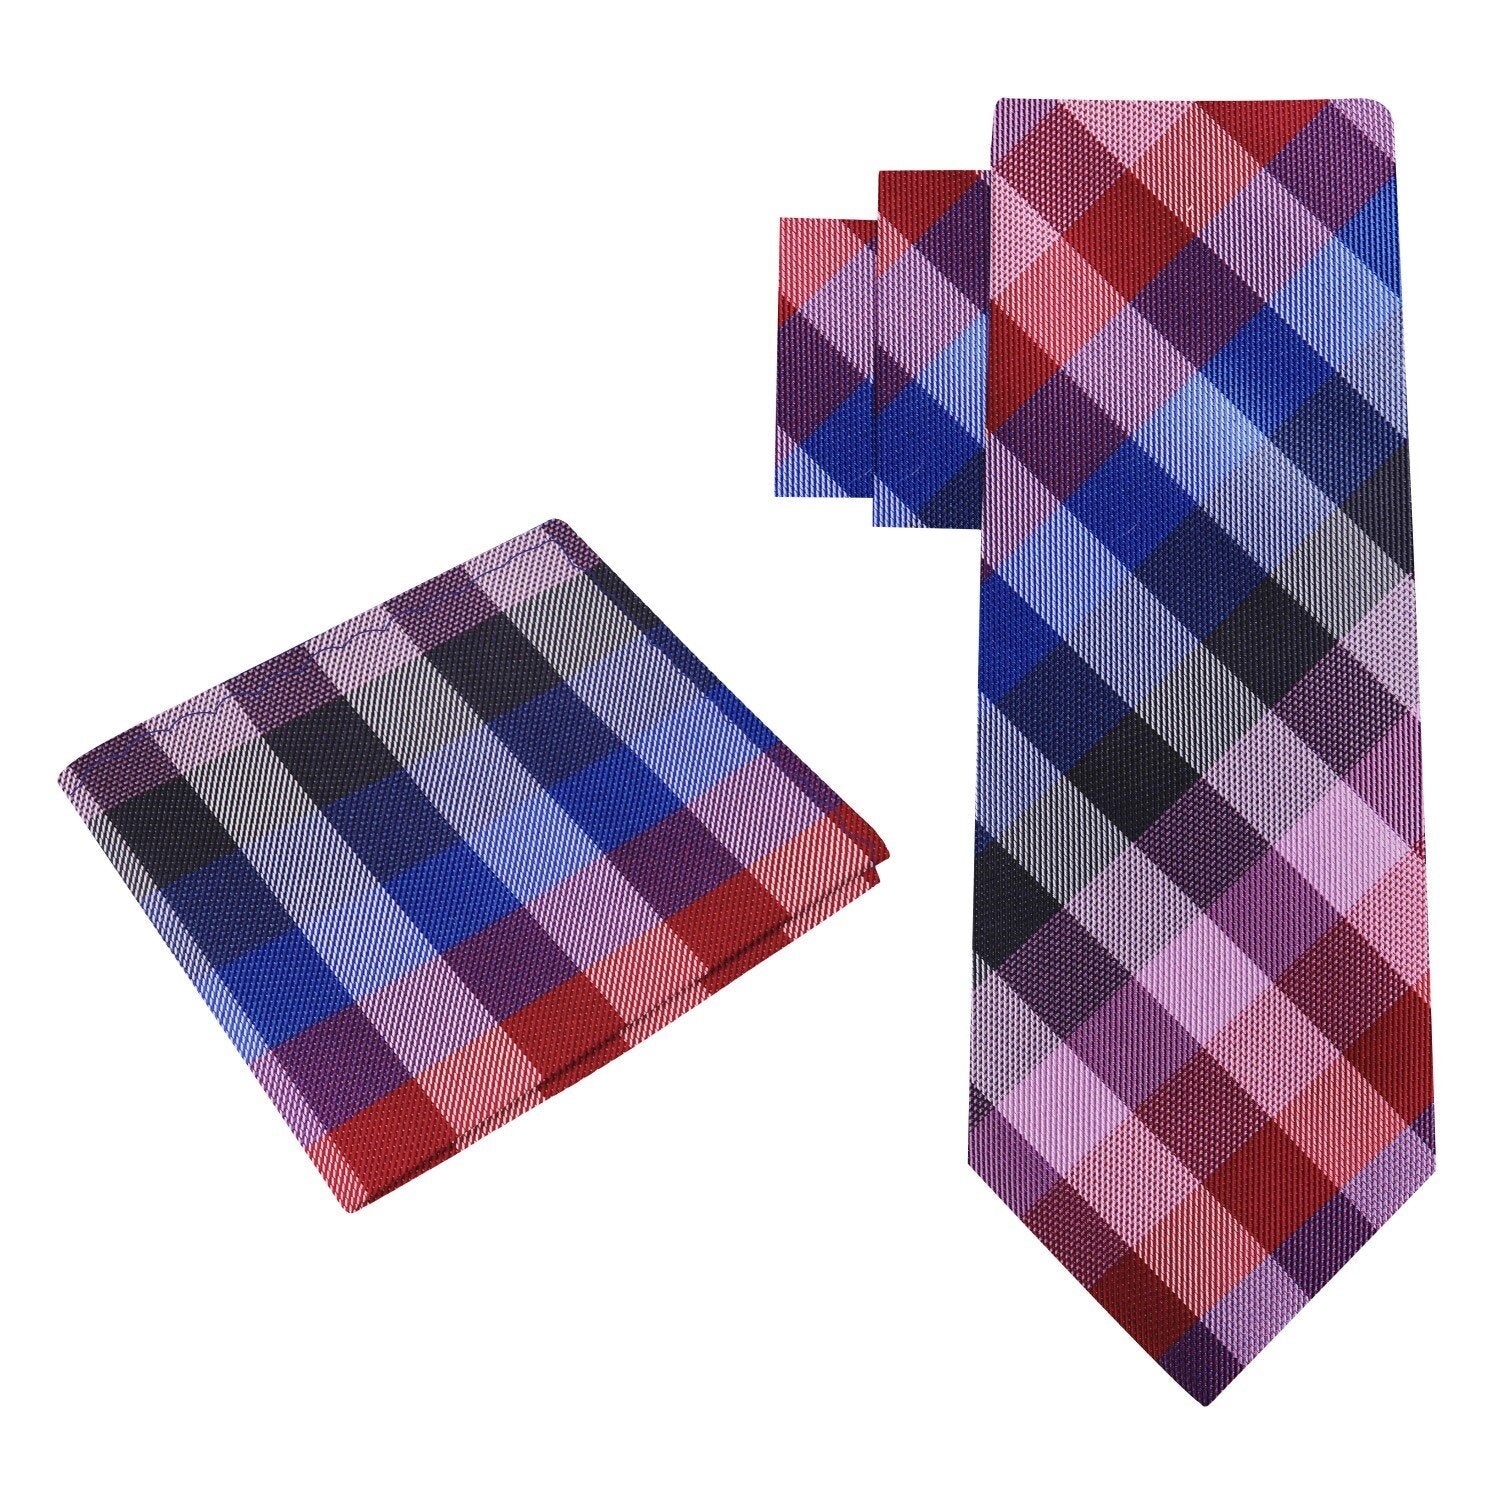 Alt View: Blue, Red, Pink, purple Check Tie and Square